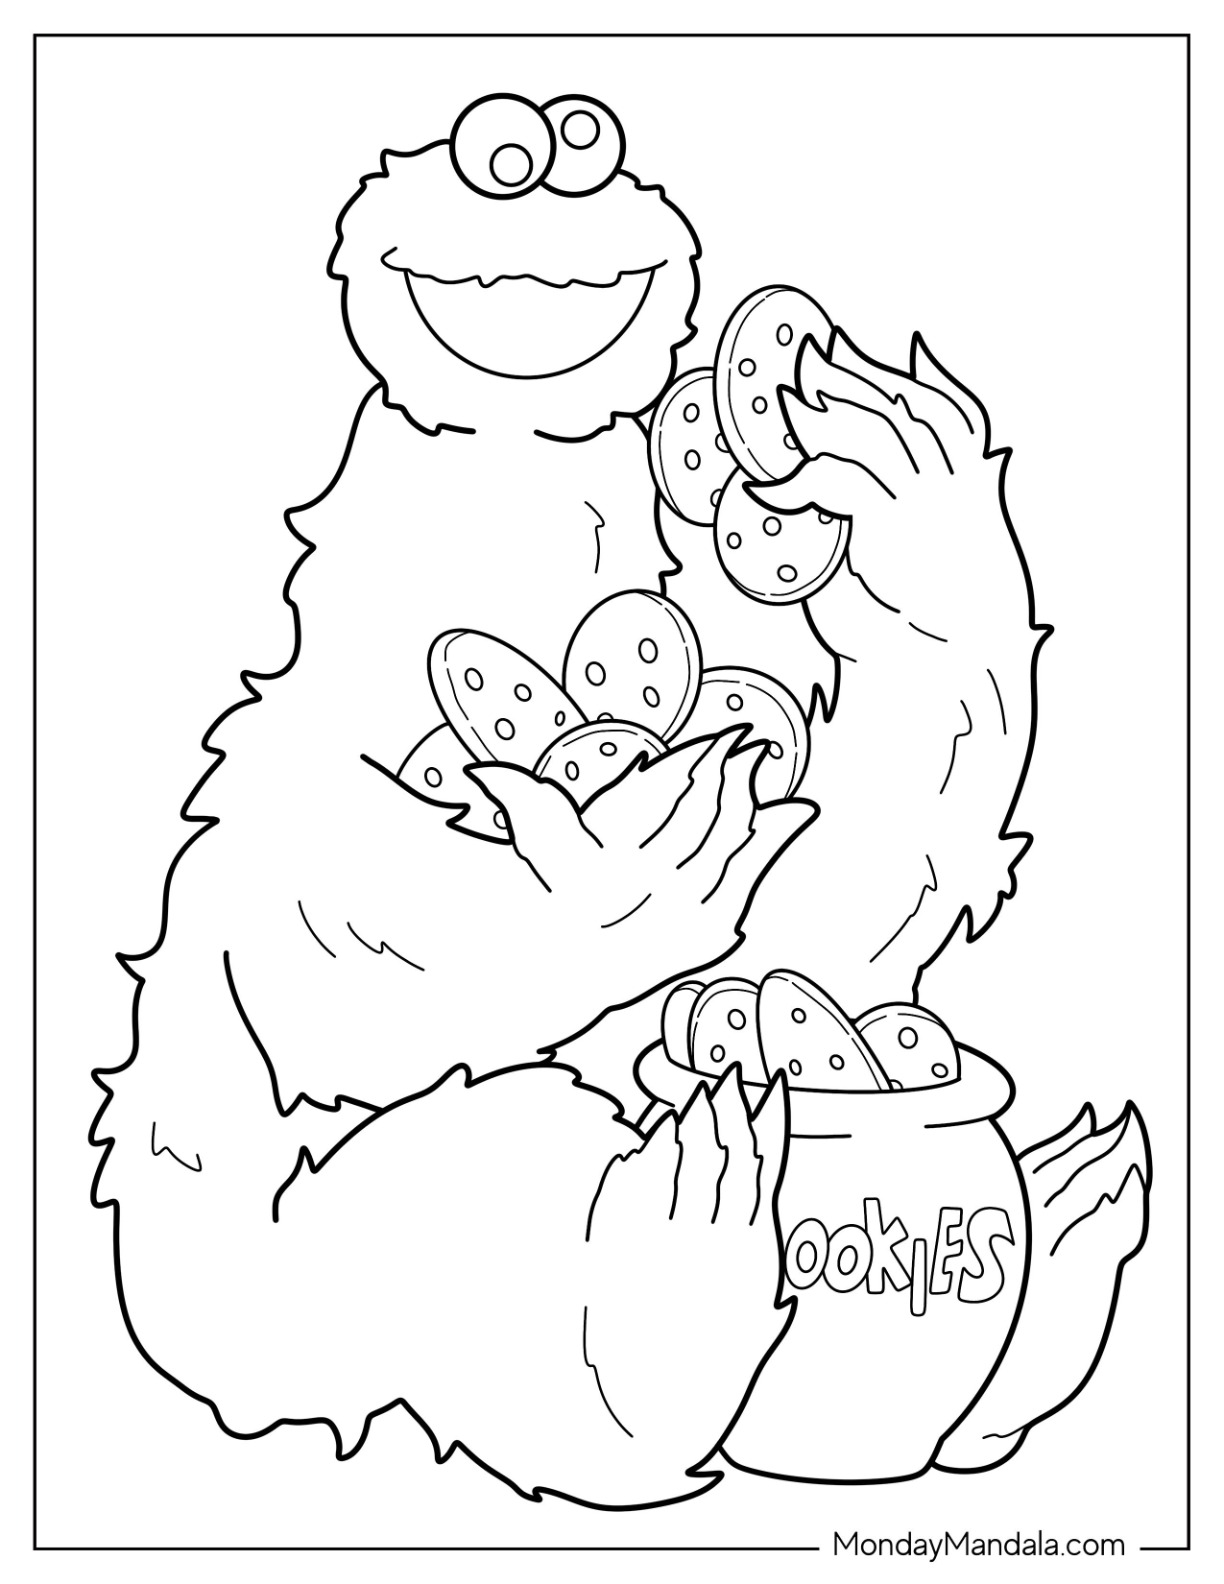 Cookie monster coloring pages free pdf printables